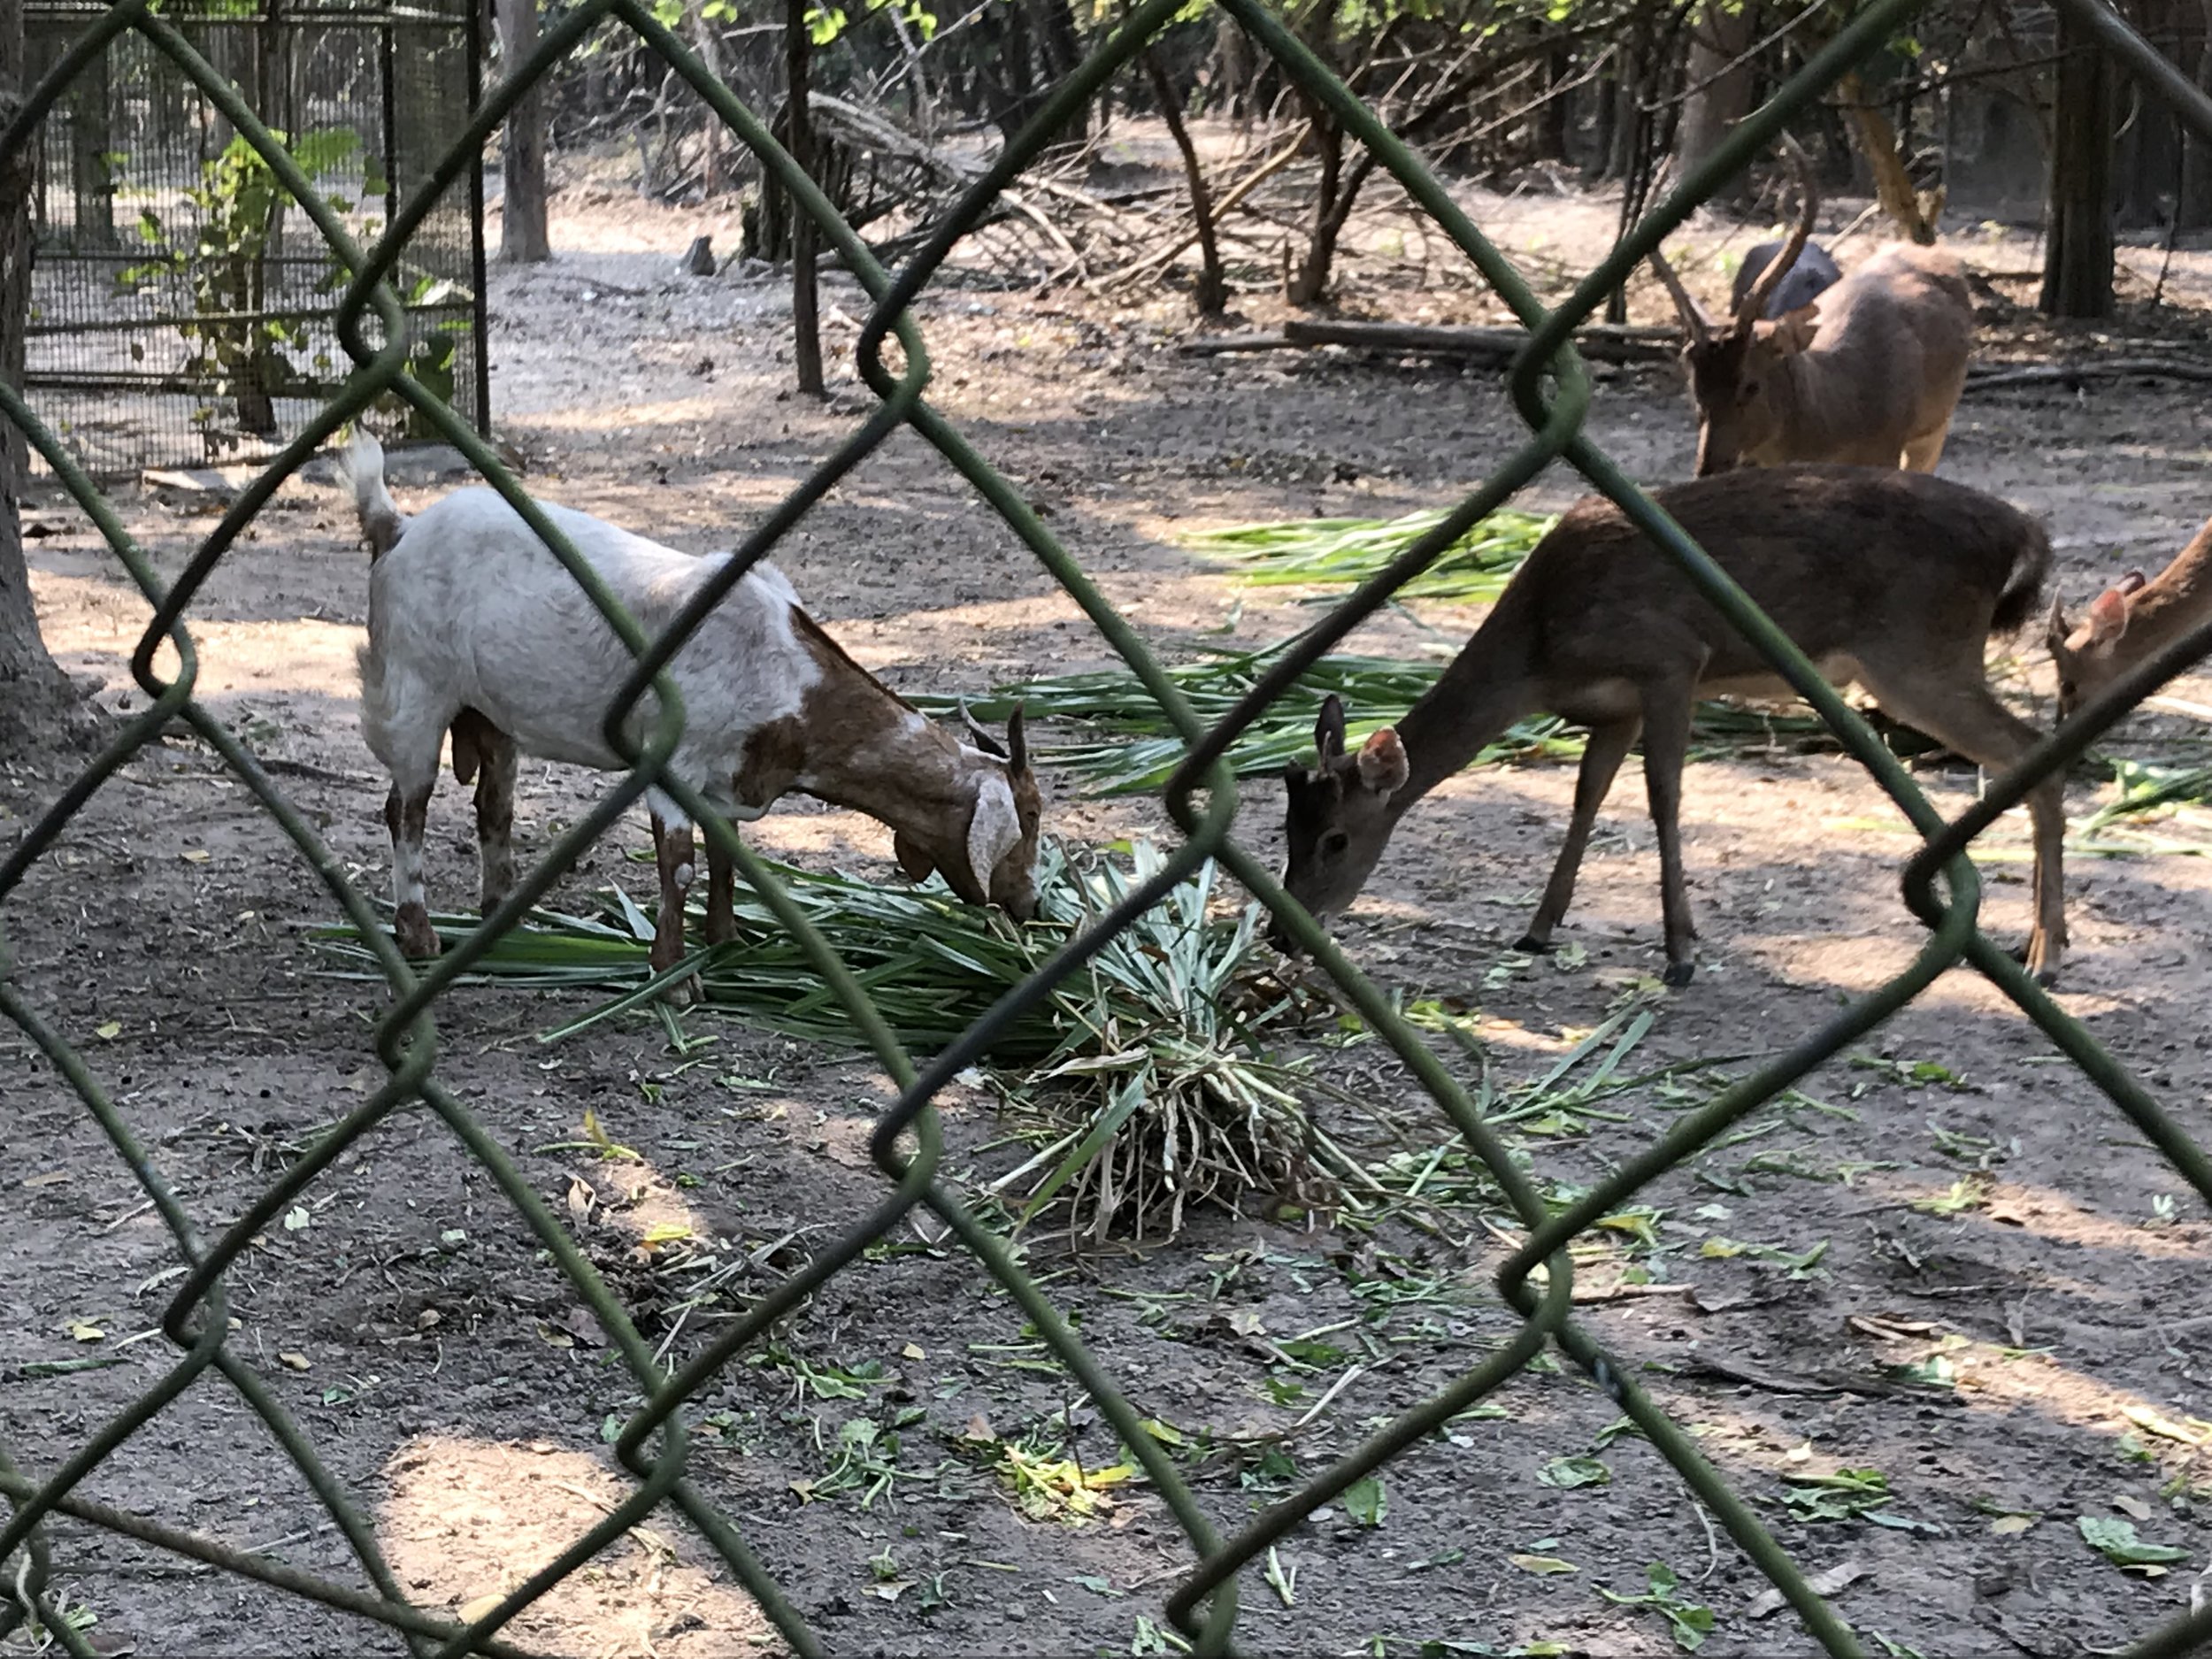 Just a goat and deer sharing a meal